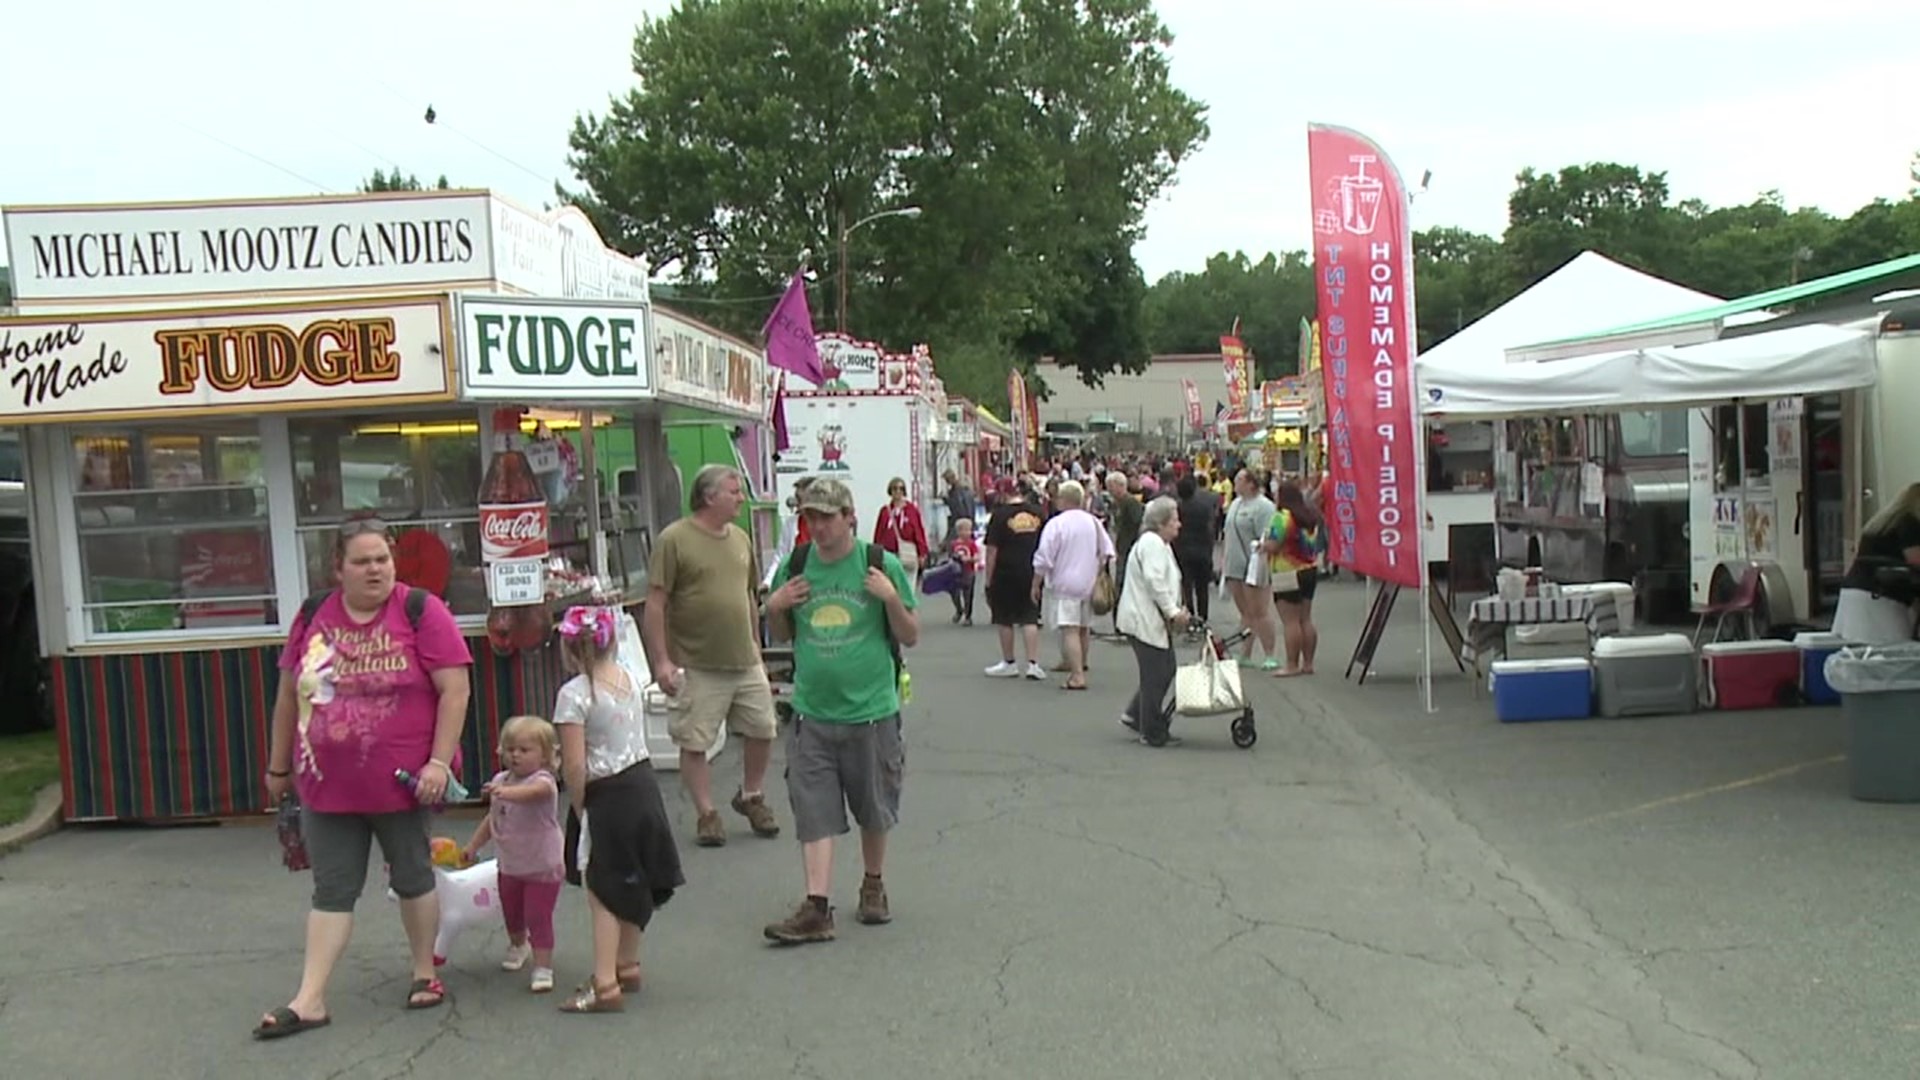 The annual event in Edwardsville kicked off on Friday. Some vendors spent their time away from events like this, coming up with some new items for people to try.